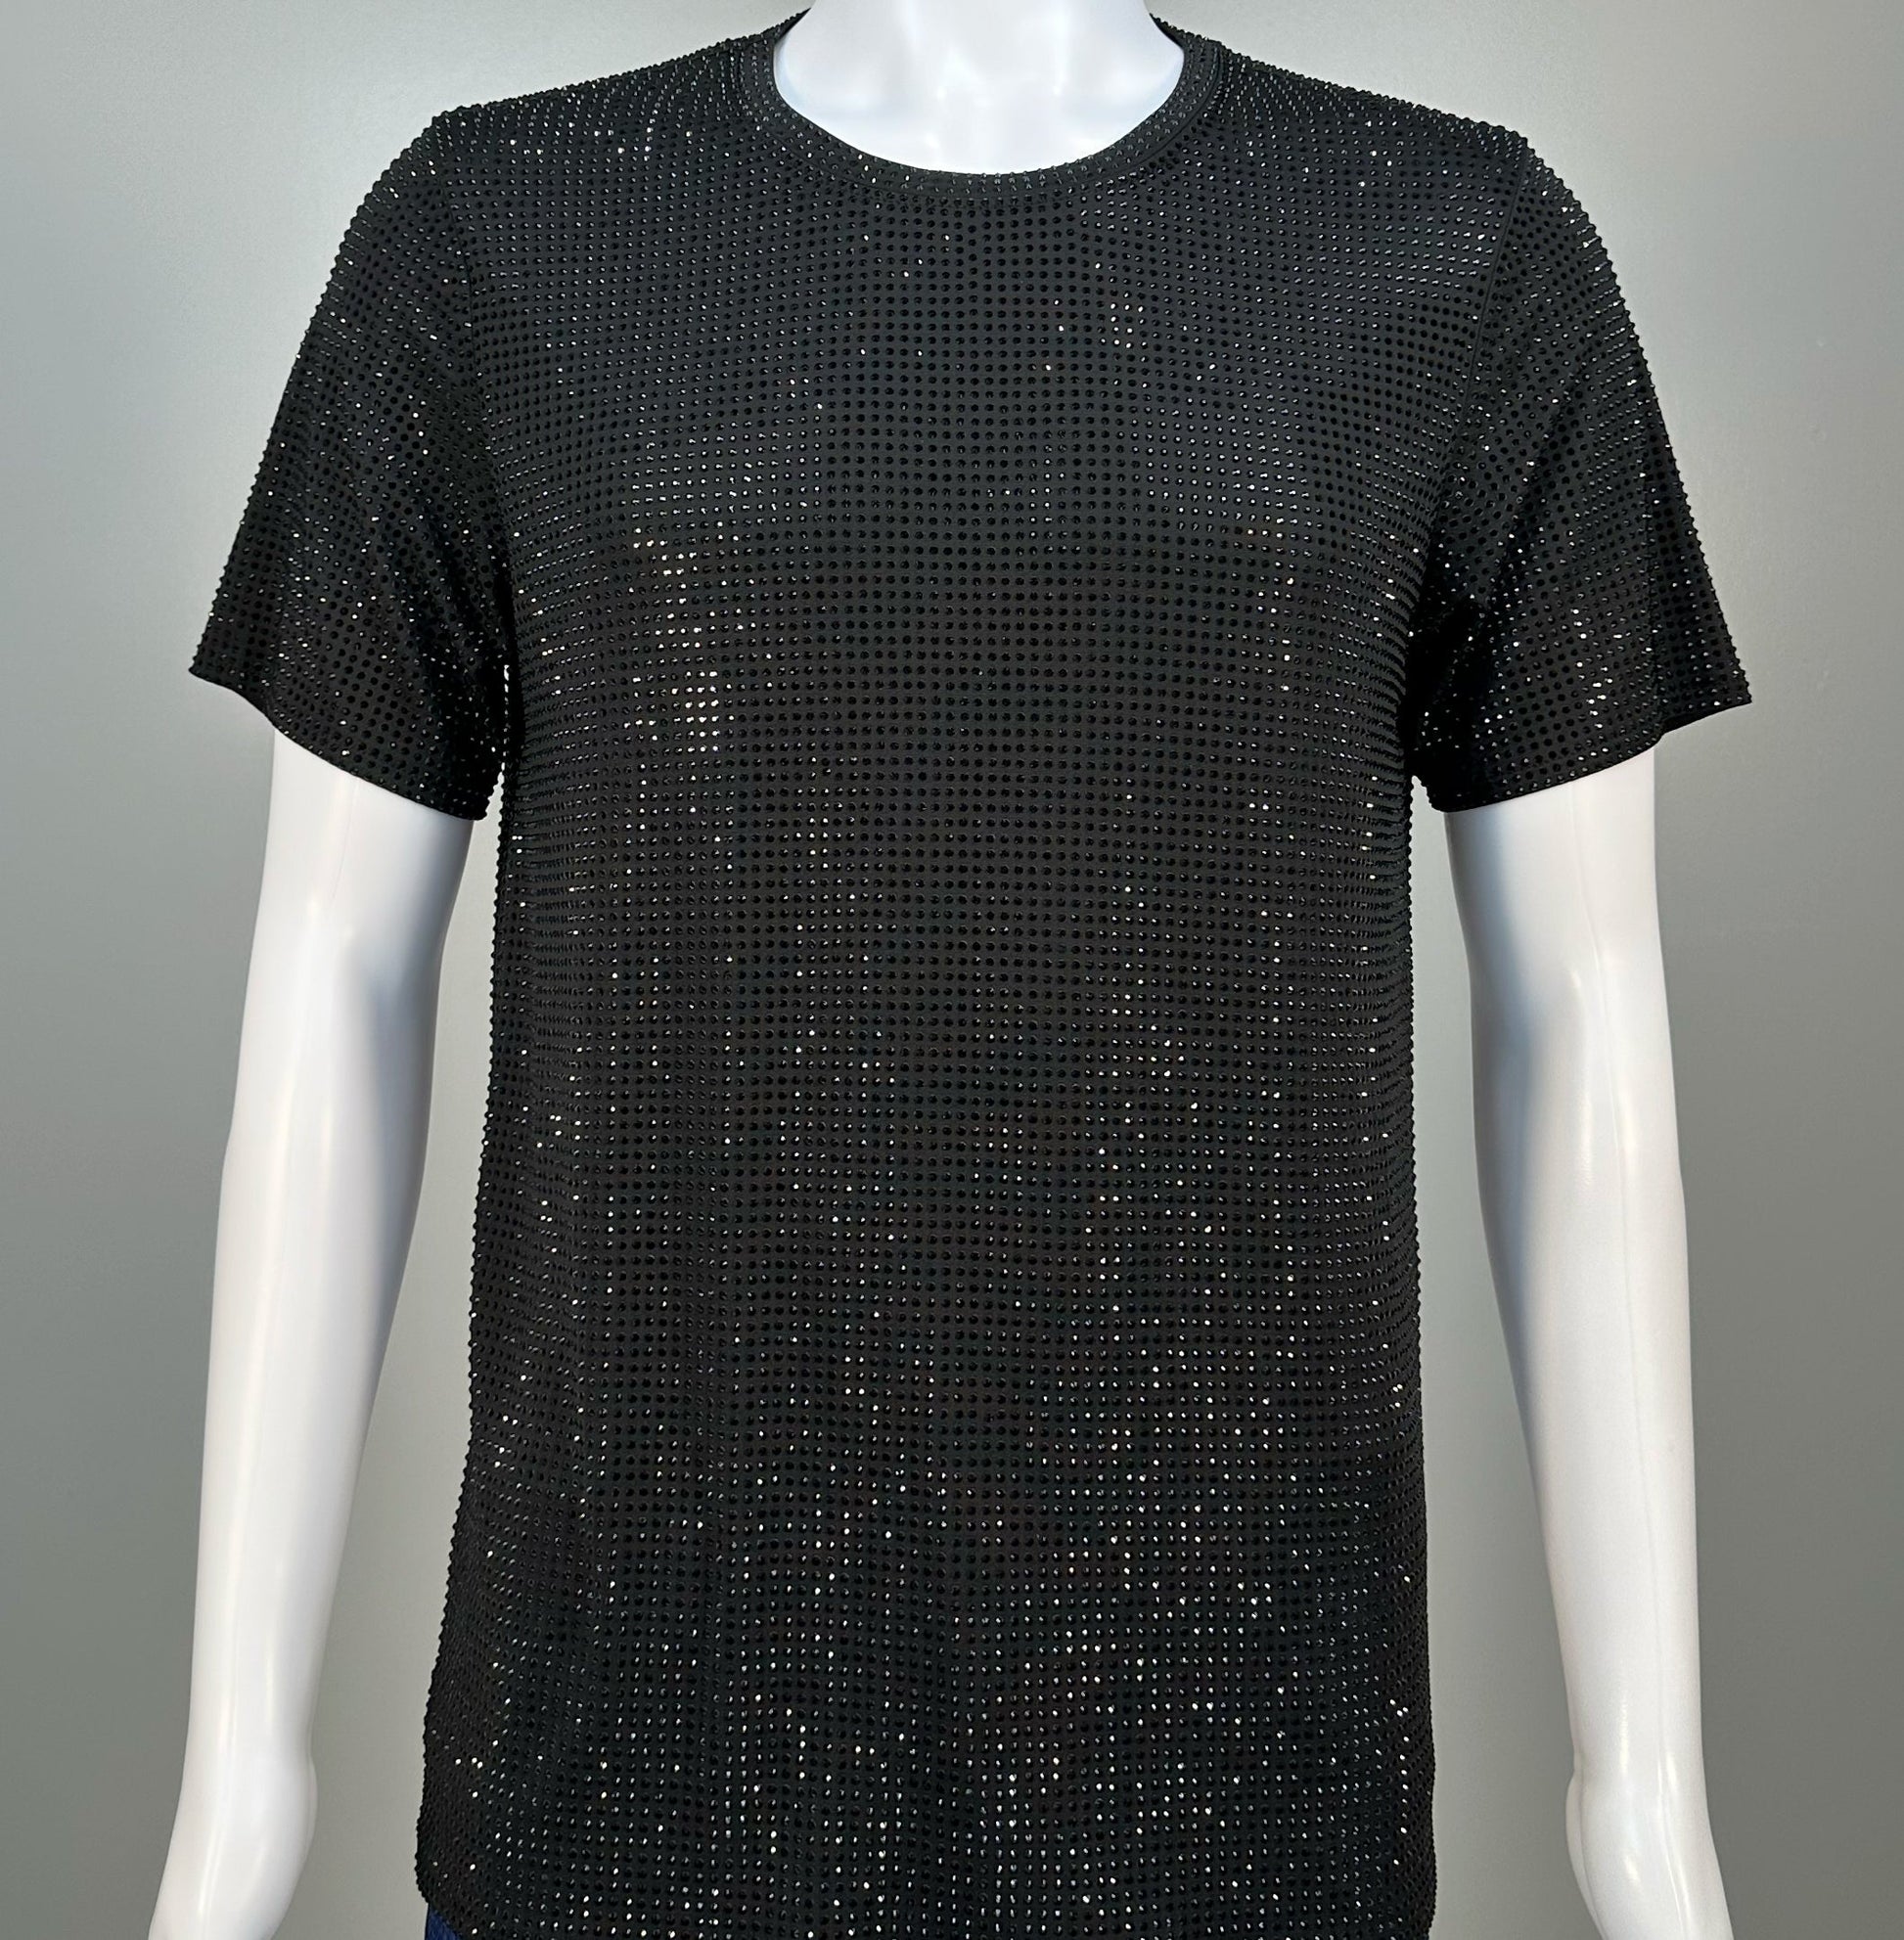 Photo of a sparkling Jet Black Crystals on Black Fabric T-shirt featuring thousands of crystal rhinestones.